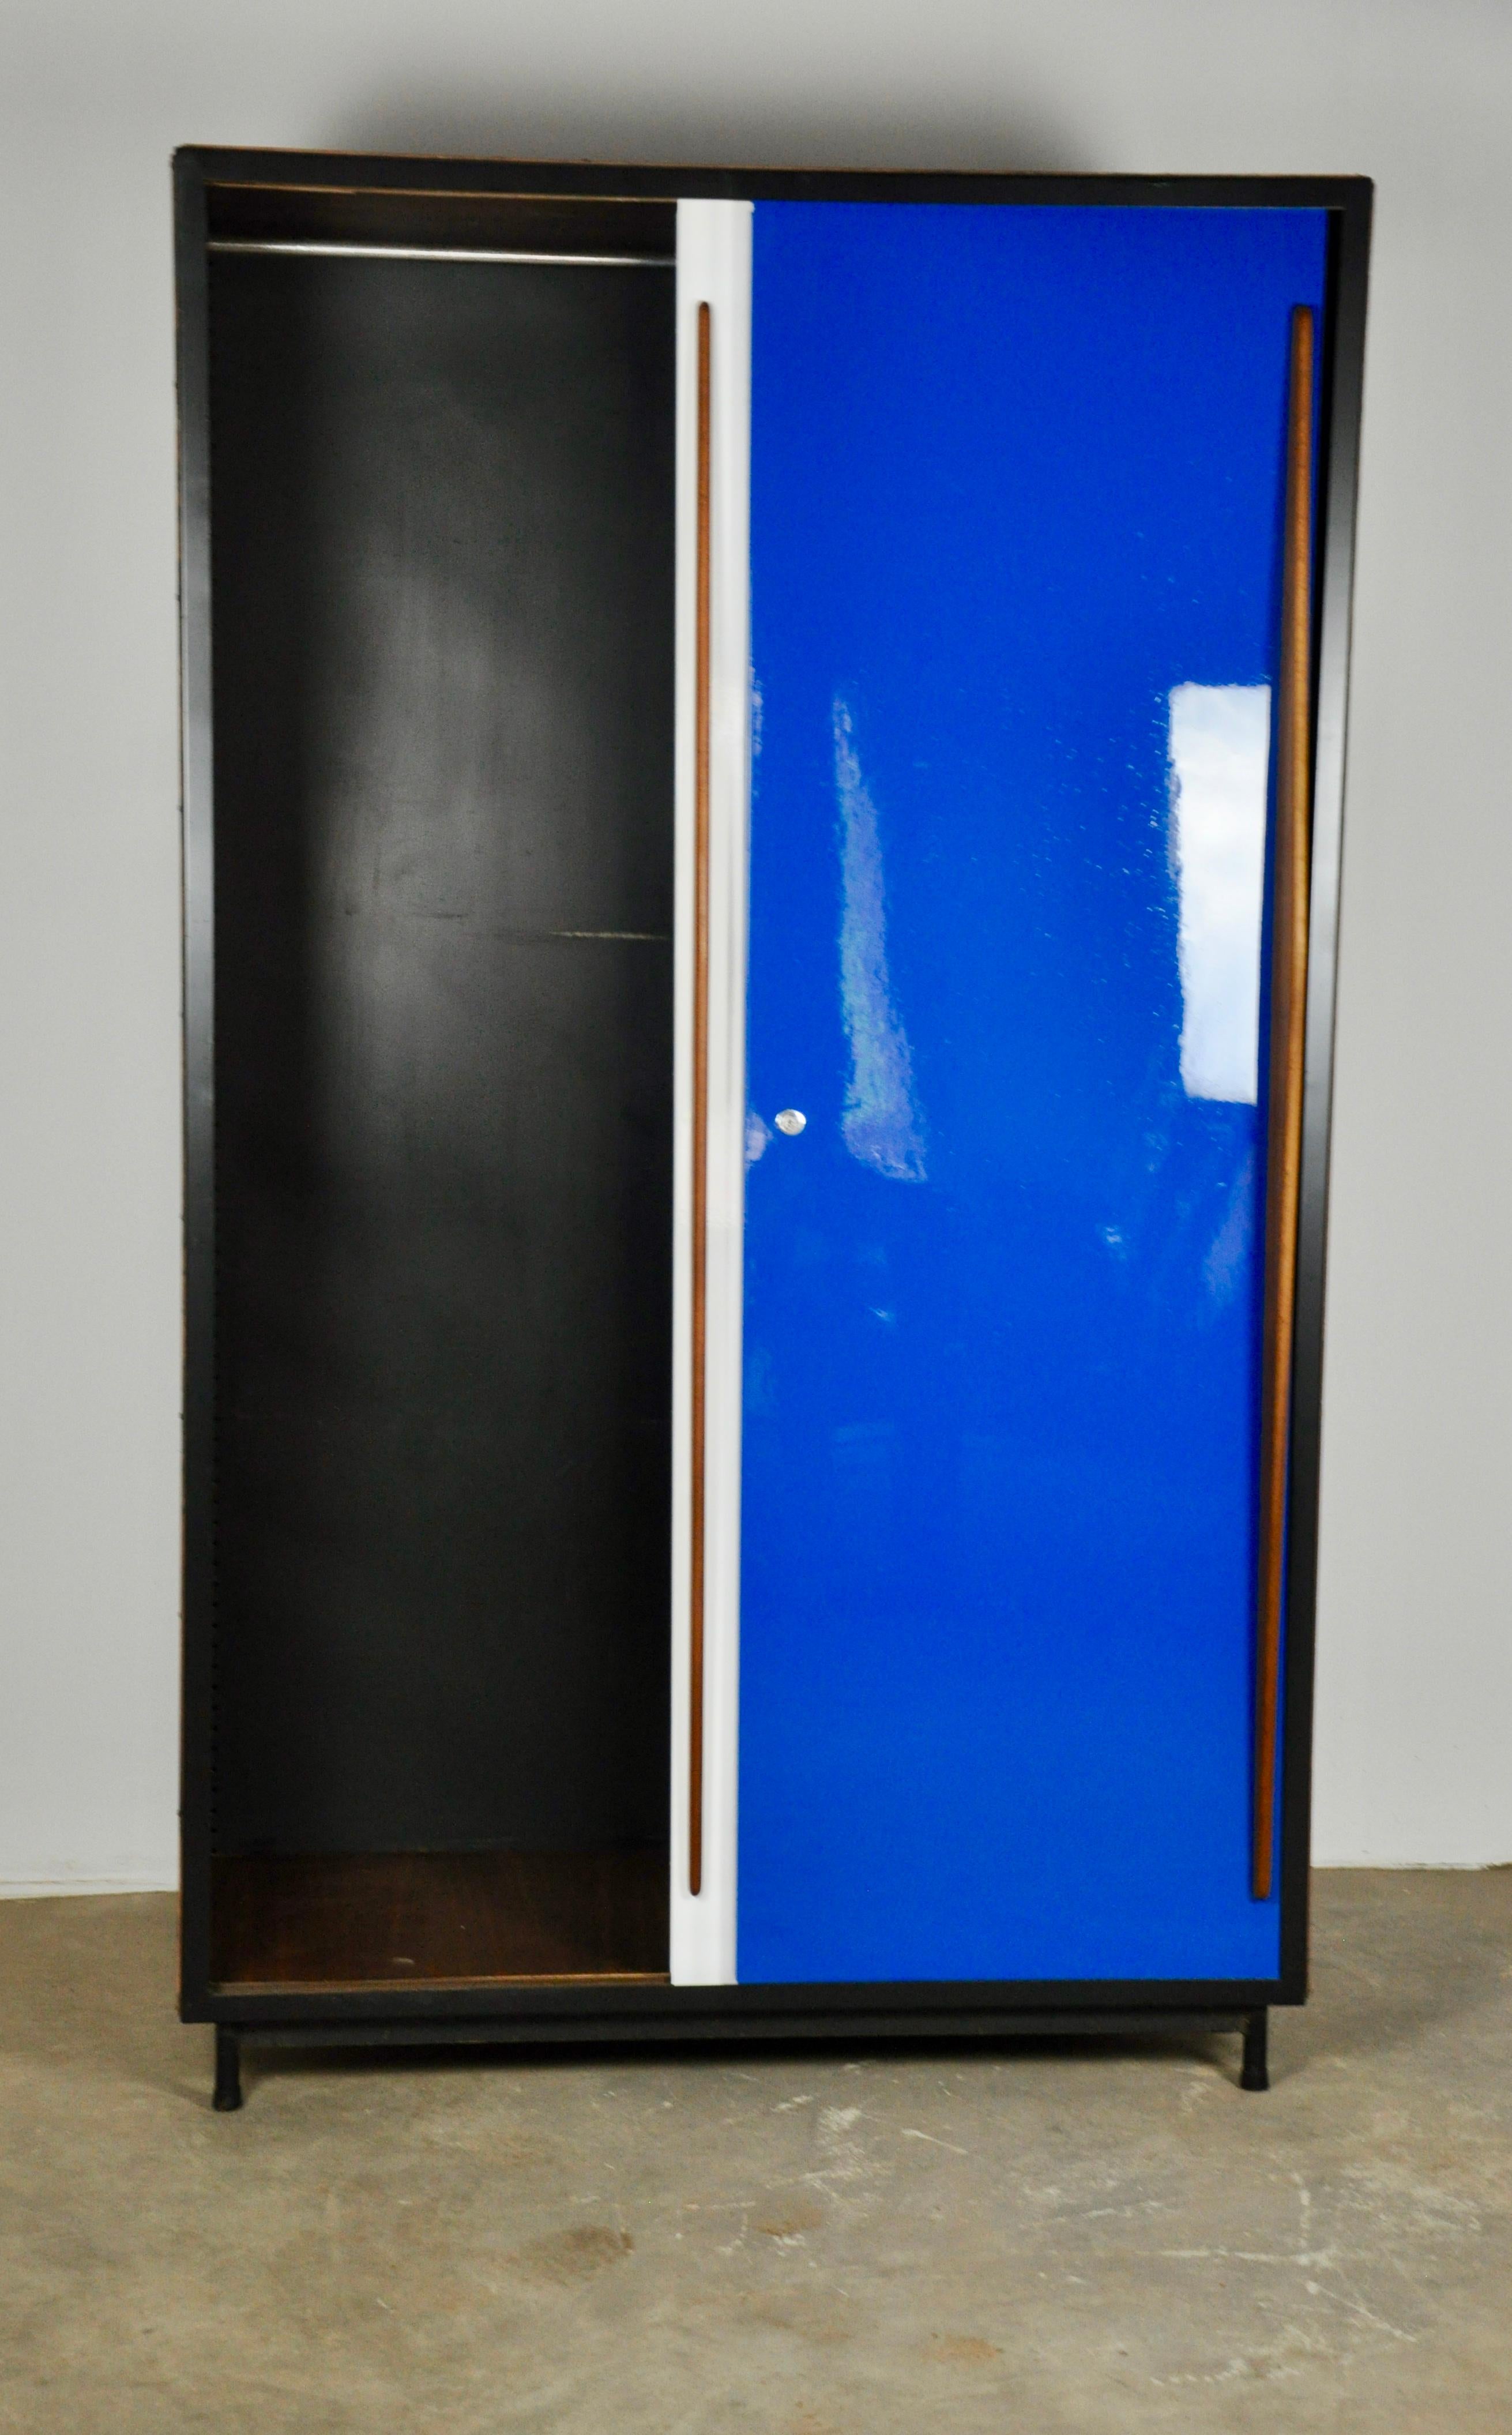 Wardrobe composed of two sliding doors in white and royal blue with a wooden handle. Interior bar to hangers.